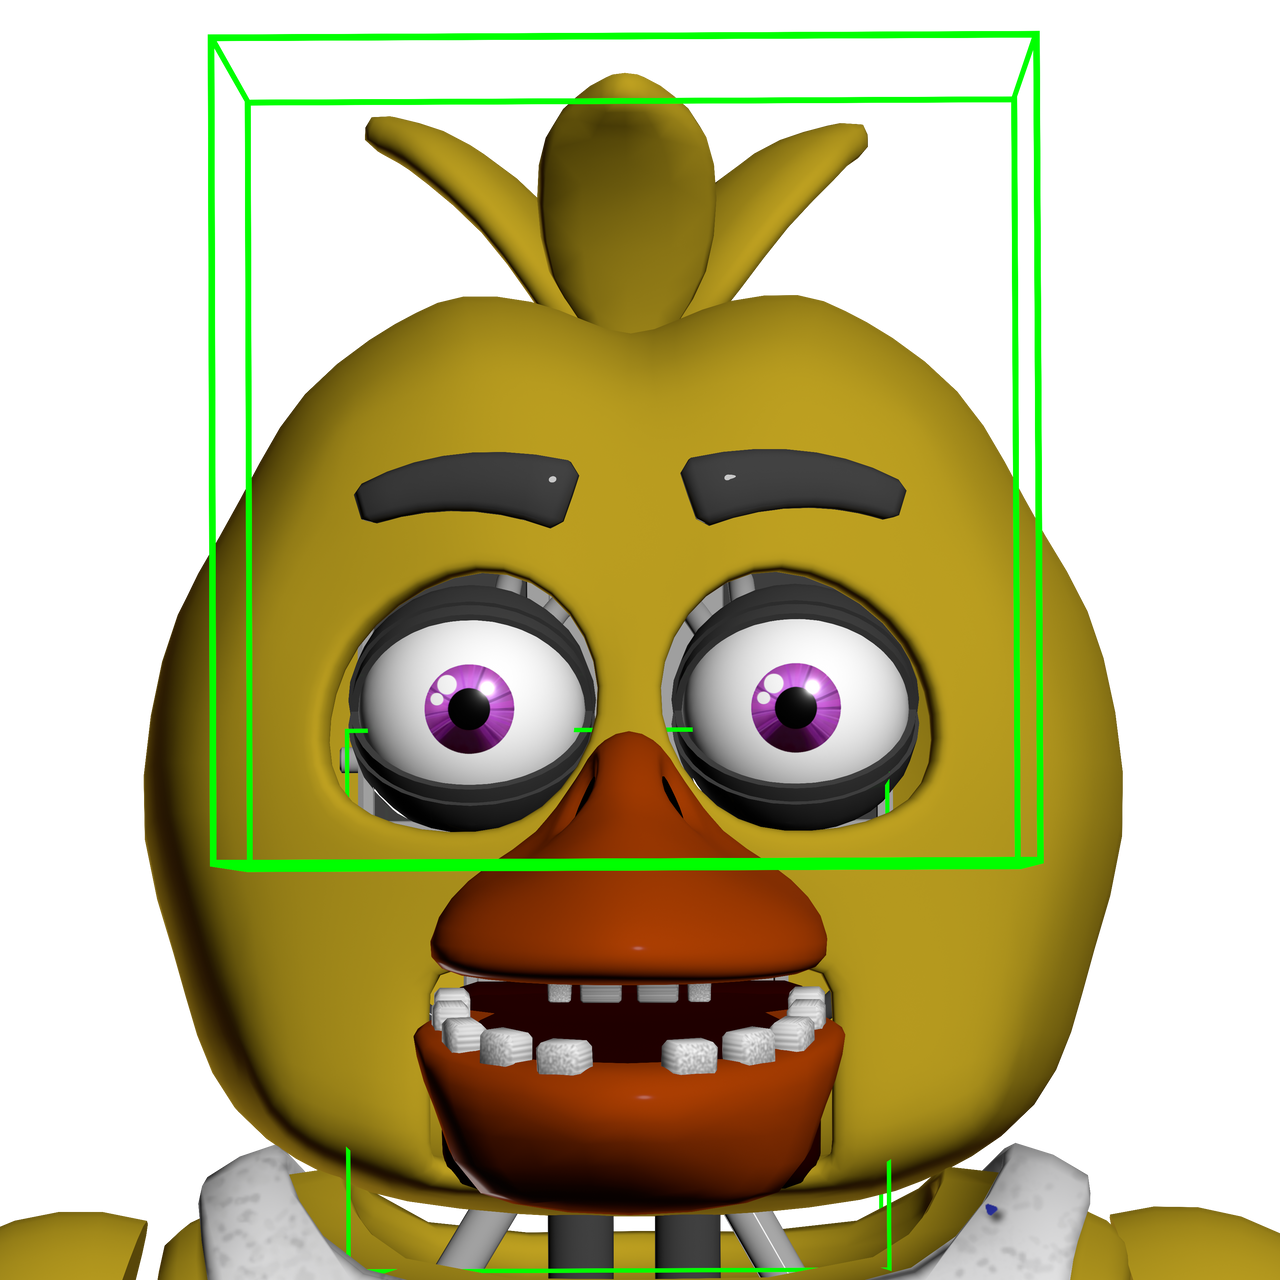 Withered Chica Character Render by TheUnbearable101 on DeviantArt